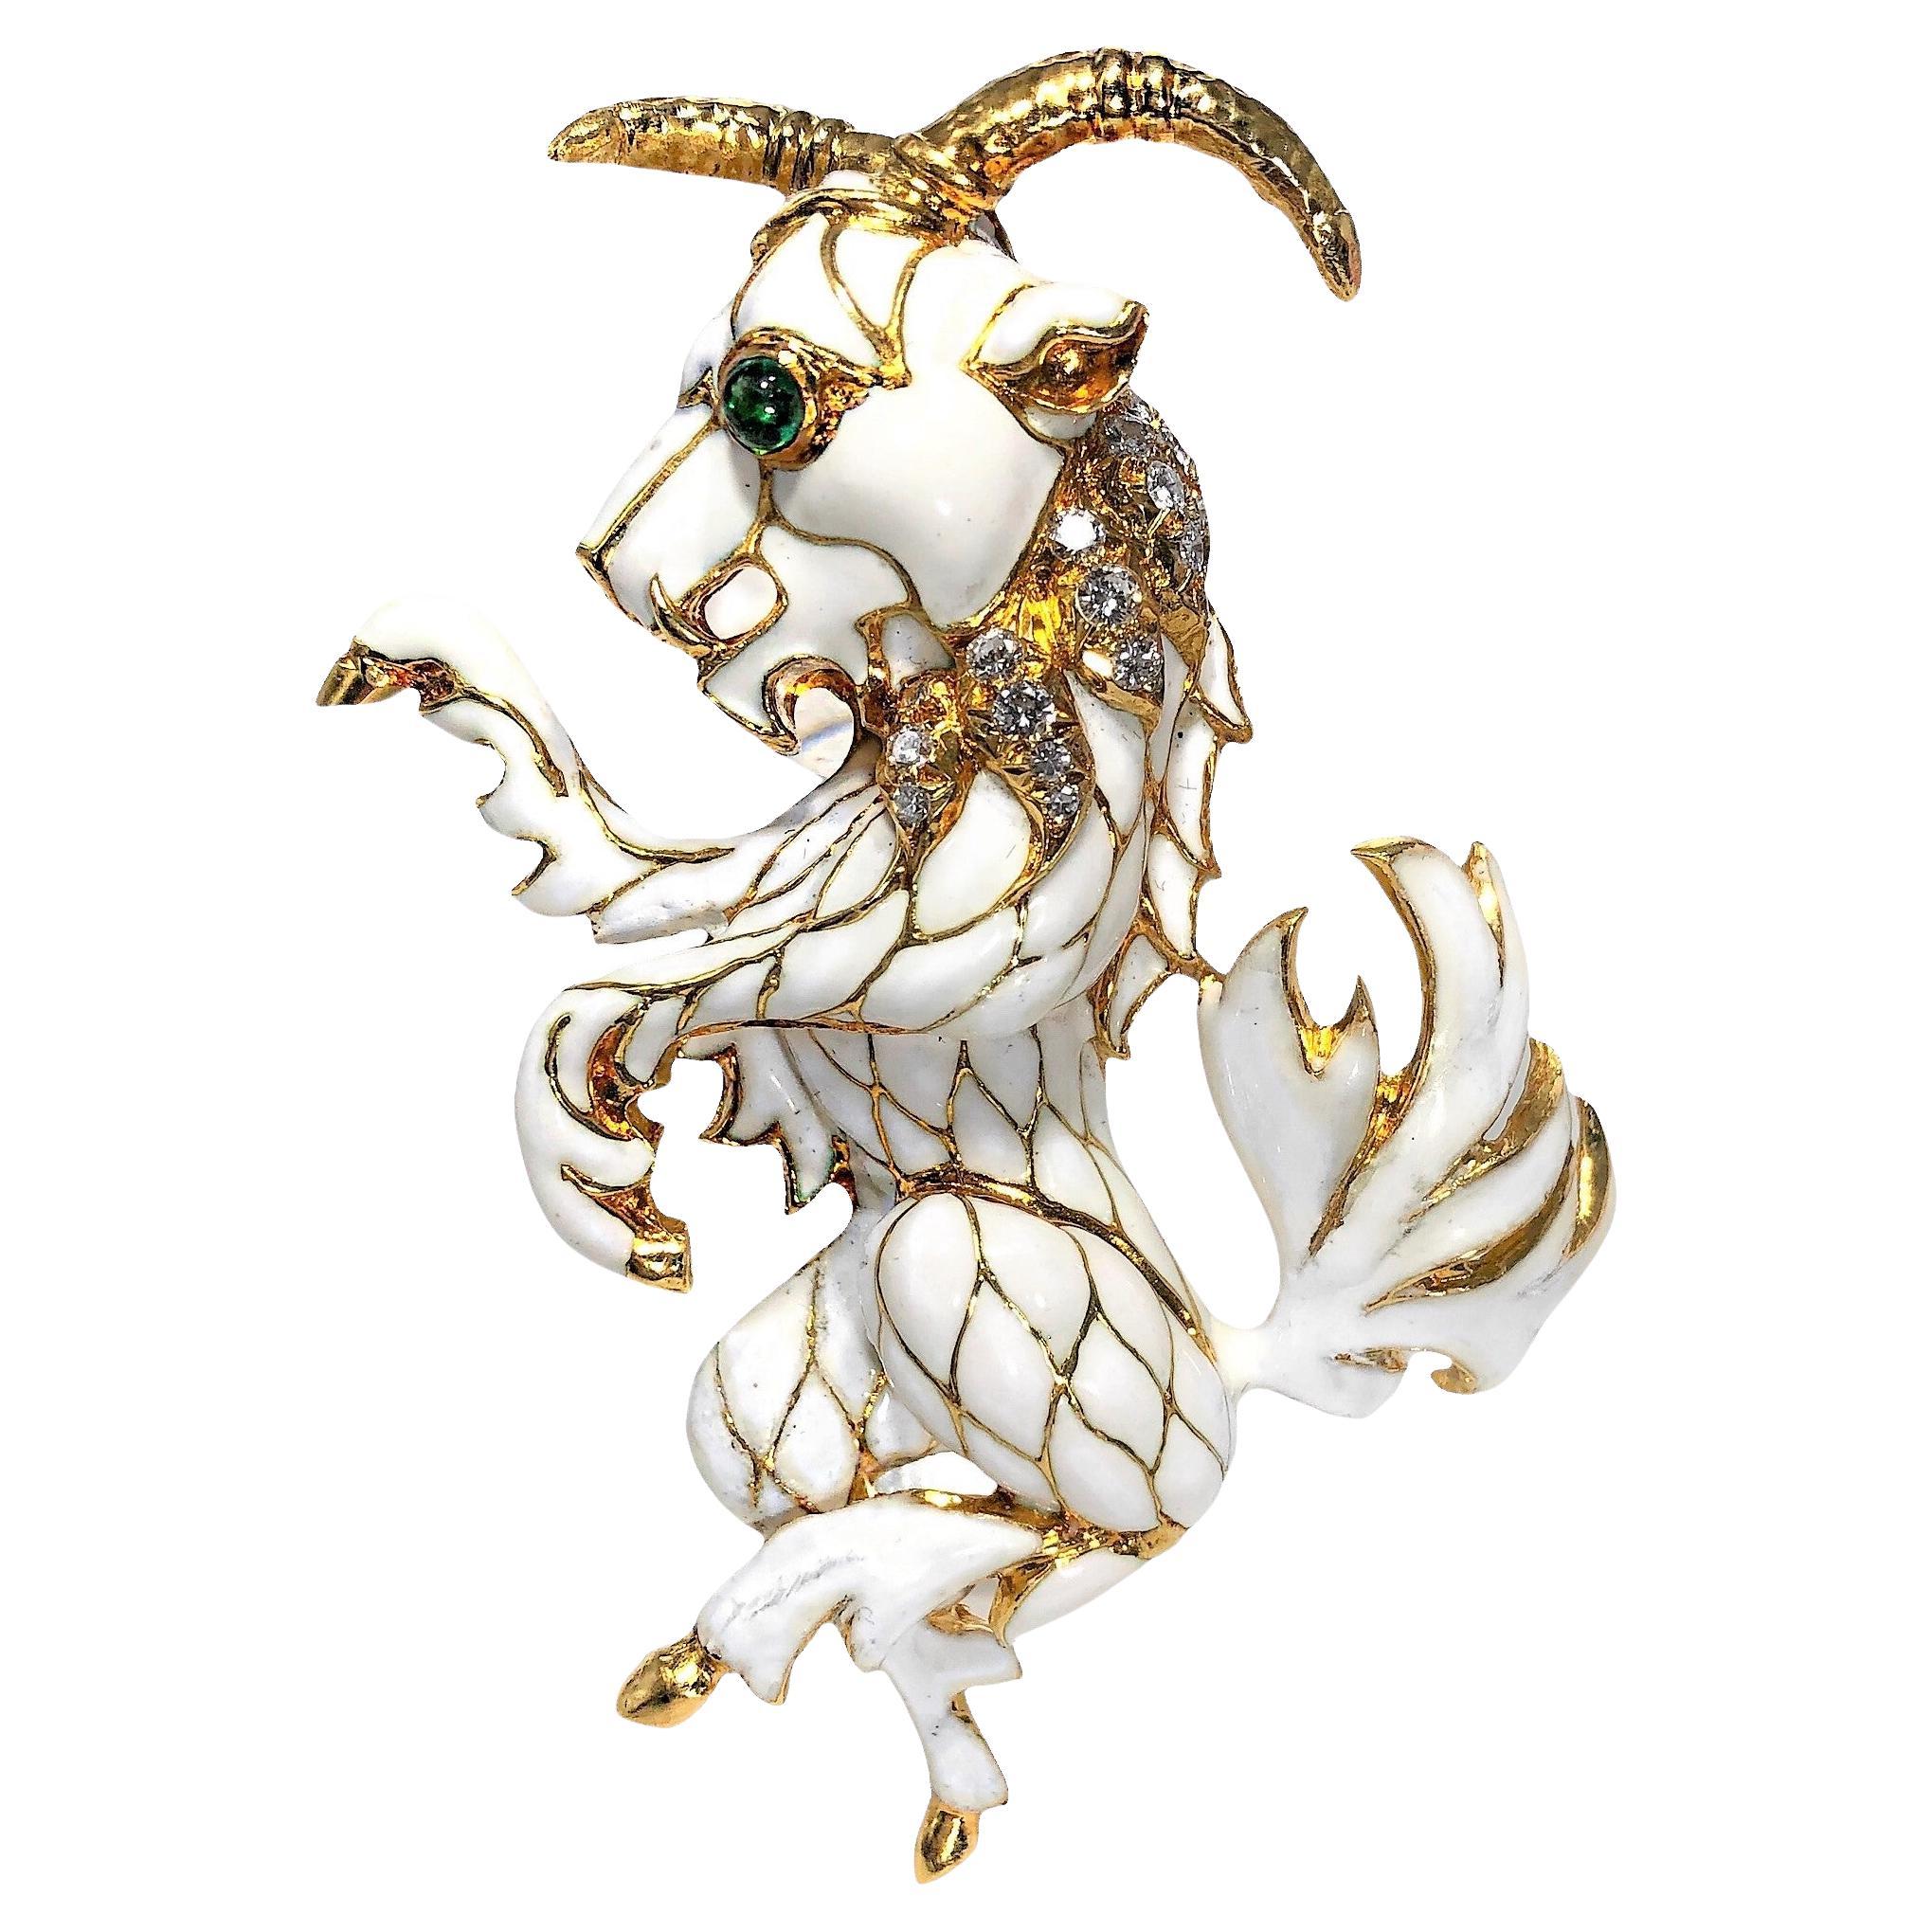 Grand Scale "Pan" Mythical Creature in 18K Gold, Enamel, Emeralds &  Diamonds  For Sale